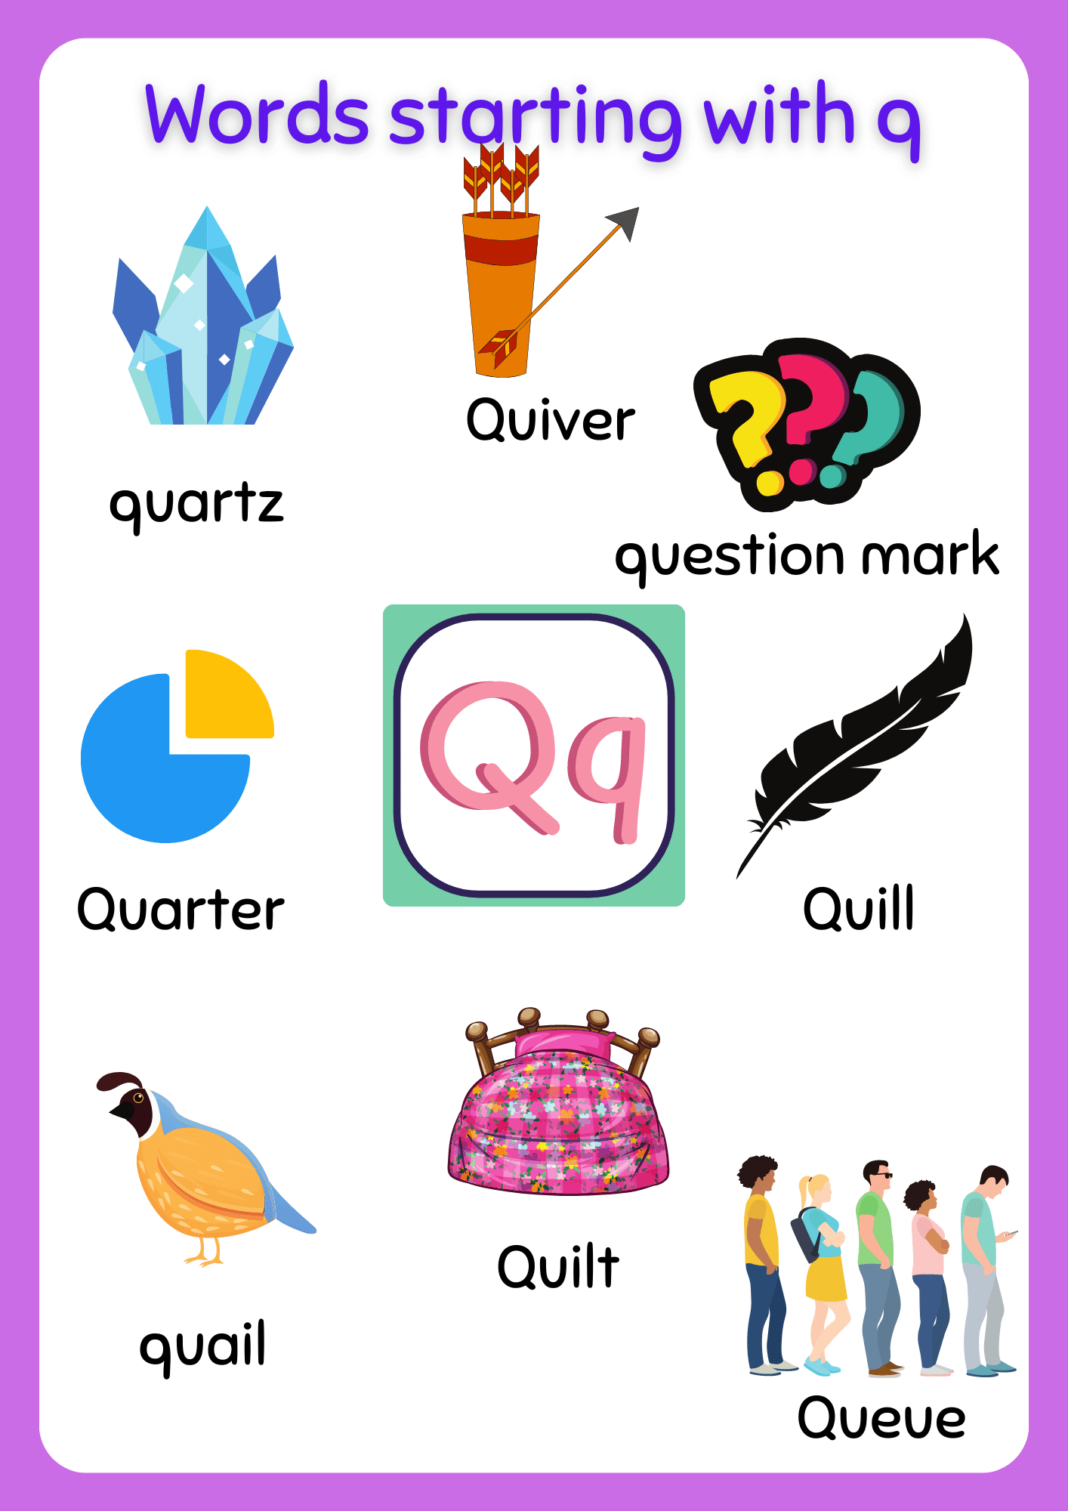 words-starting-with-qee-mystery-of-letters this blog is very potential and edifying about words starting with qee.